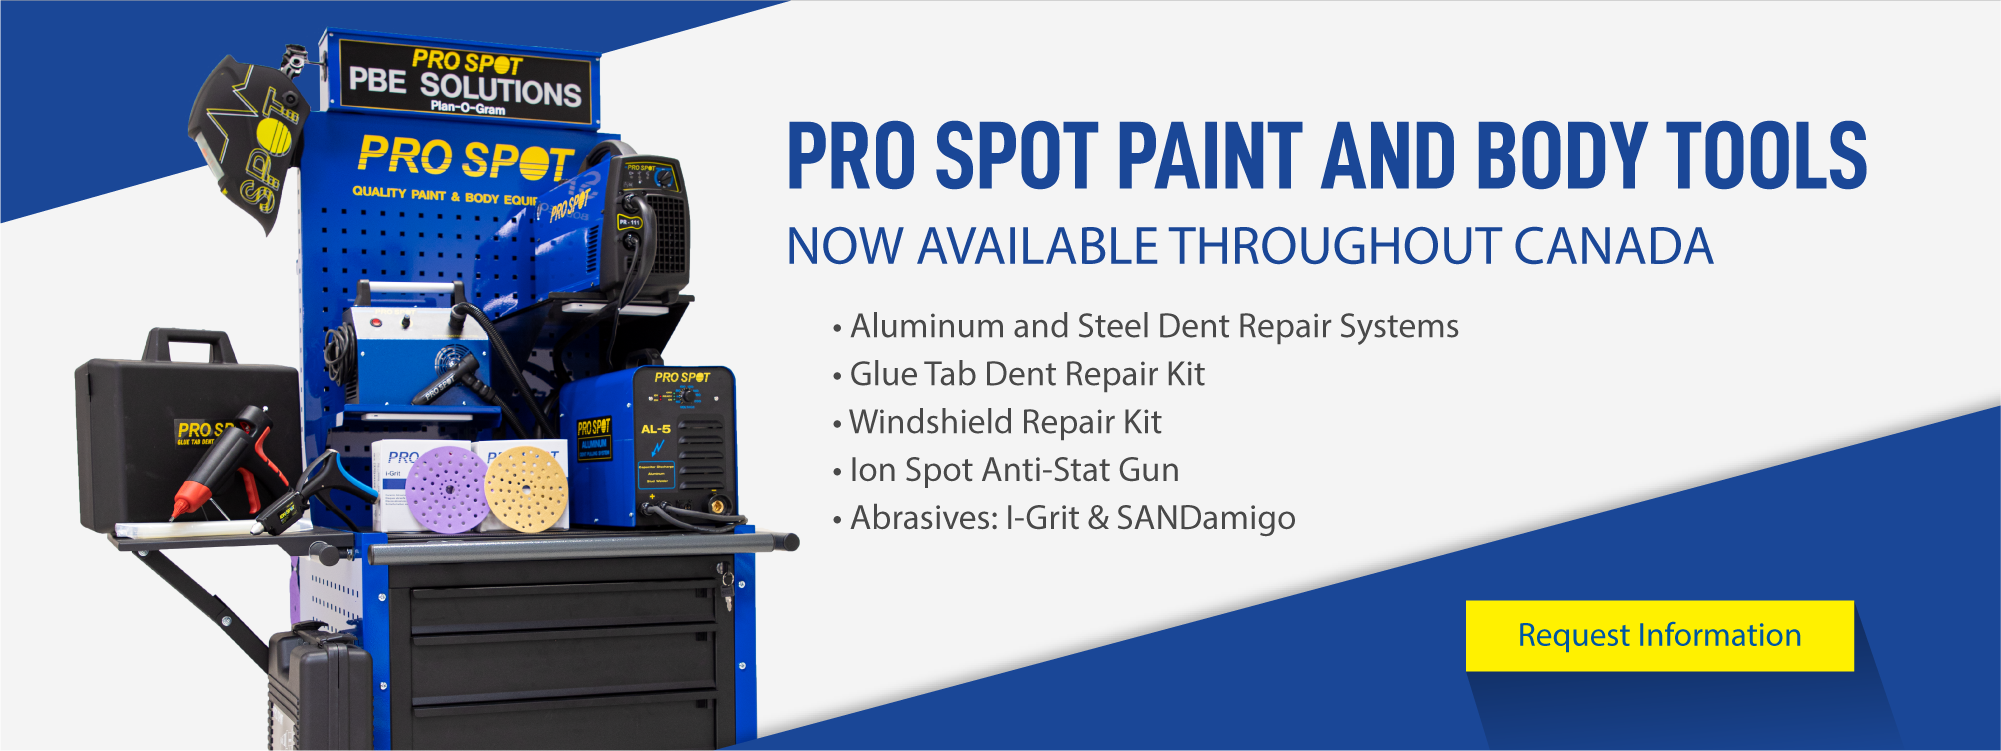 Pro Spot Paint and body Tools